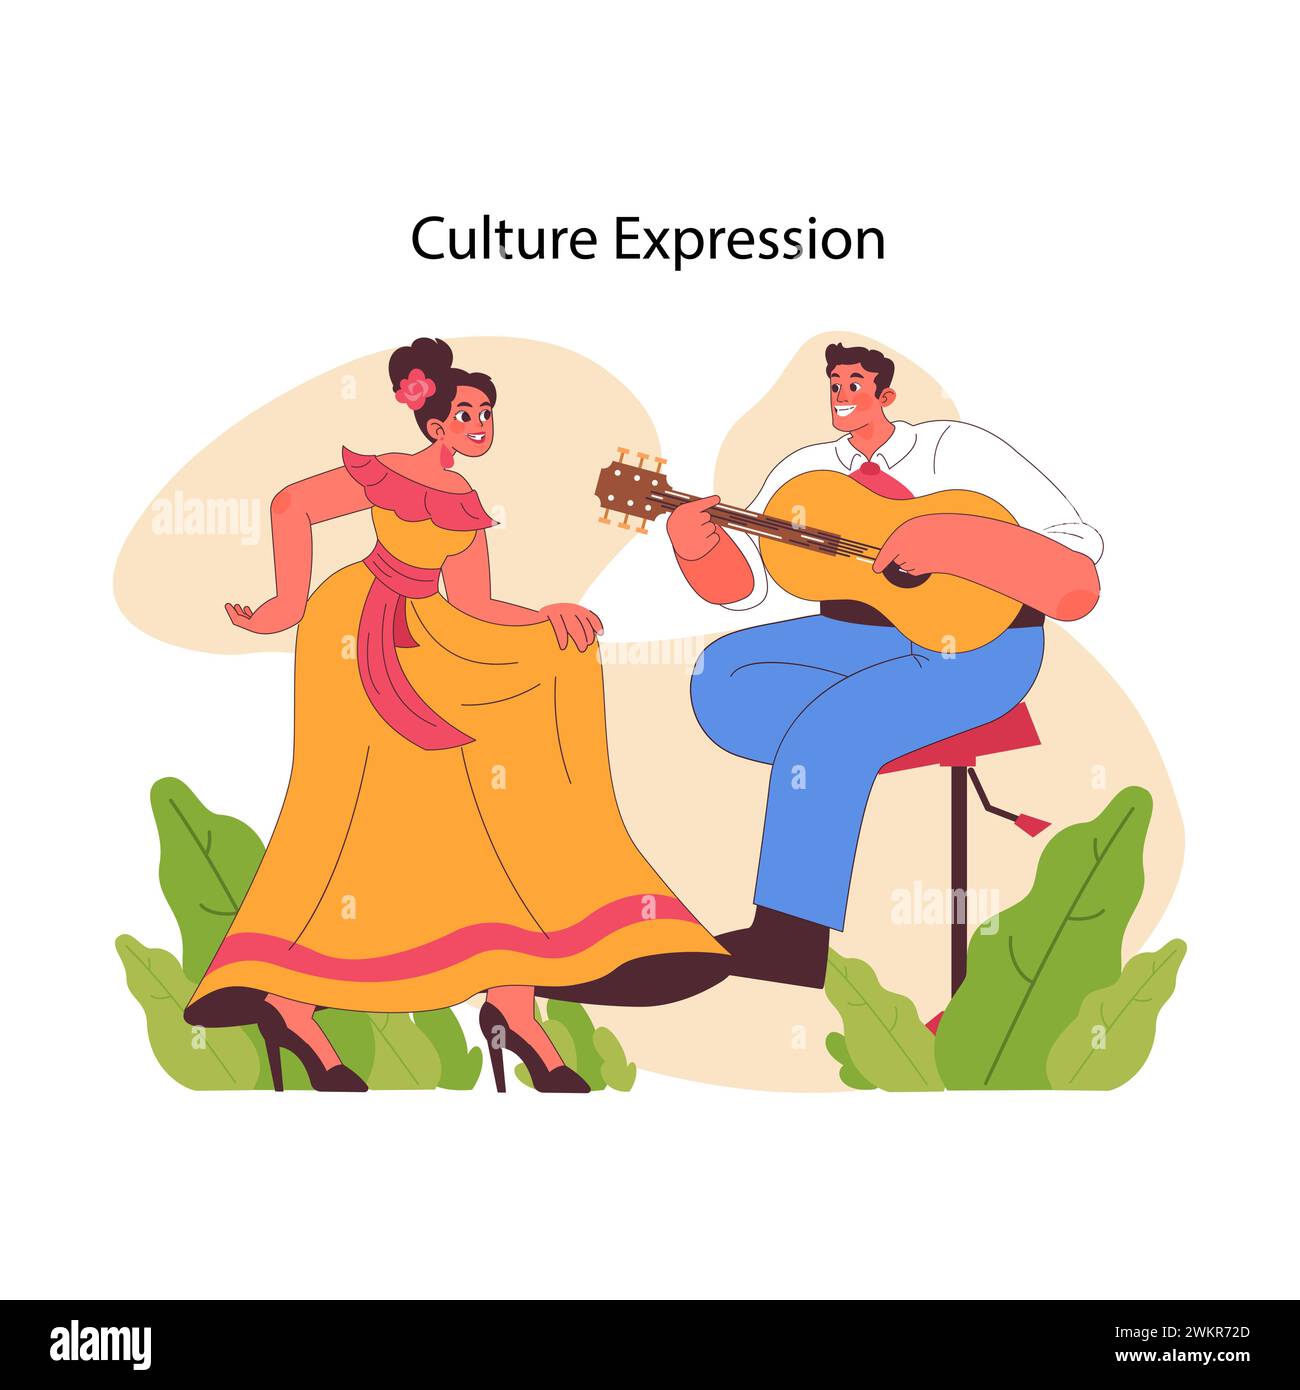 Culture expression concept. Performers in traditional attire, sharing heritage through music and dance. Celebrating in Hispanic, Mexican costumes. Rich cultural storytelling. Flat vector illustration Stock Vector